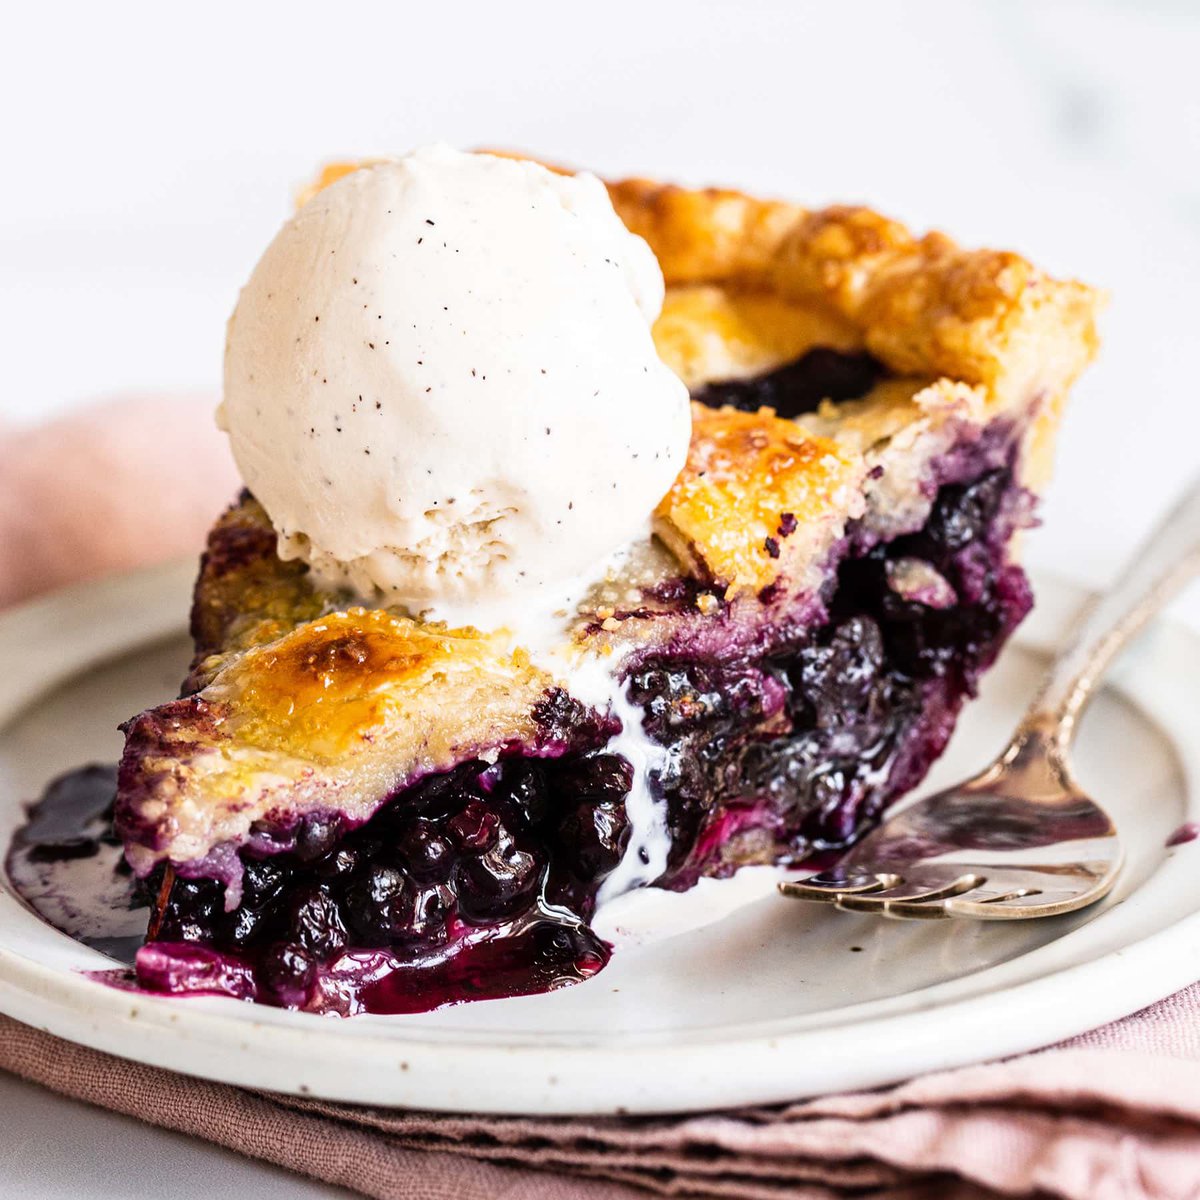 For #BlueberryPieDay do you want your pie regular or a la mode? 🤔